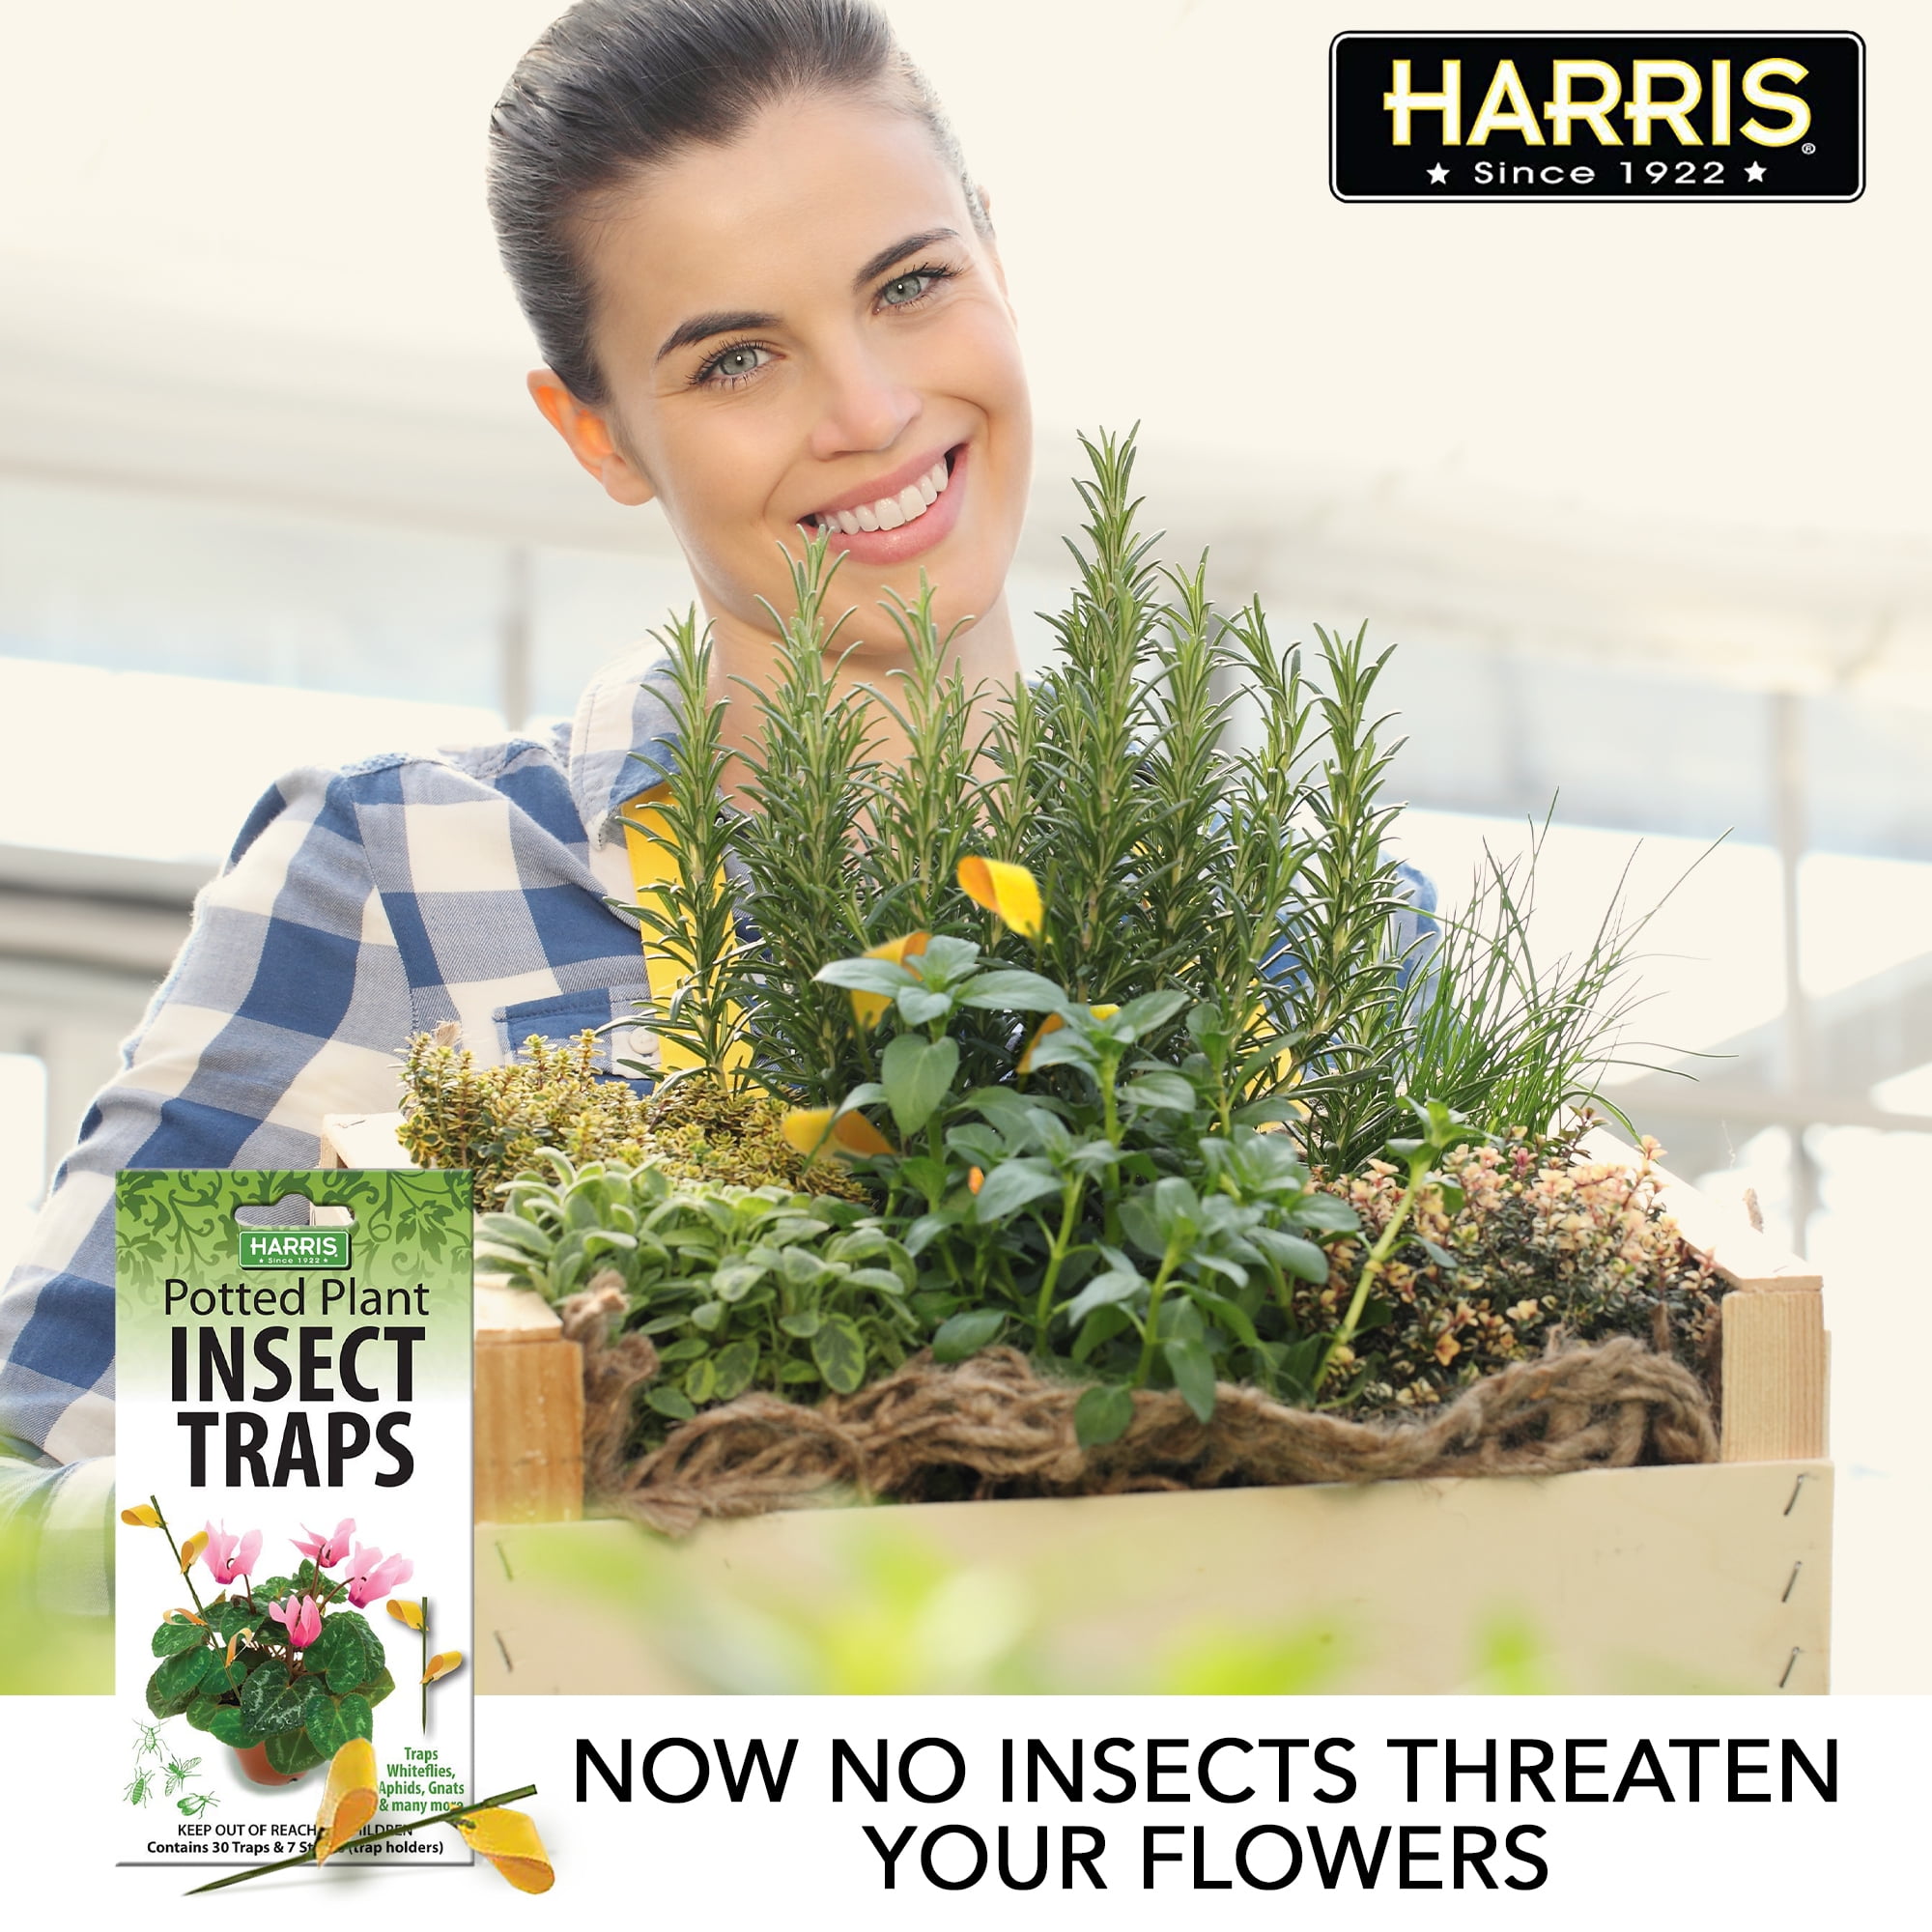 Harris Potted Plant Insect Traps for Gnats, Aphids, Whiteflies and